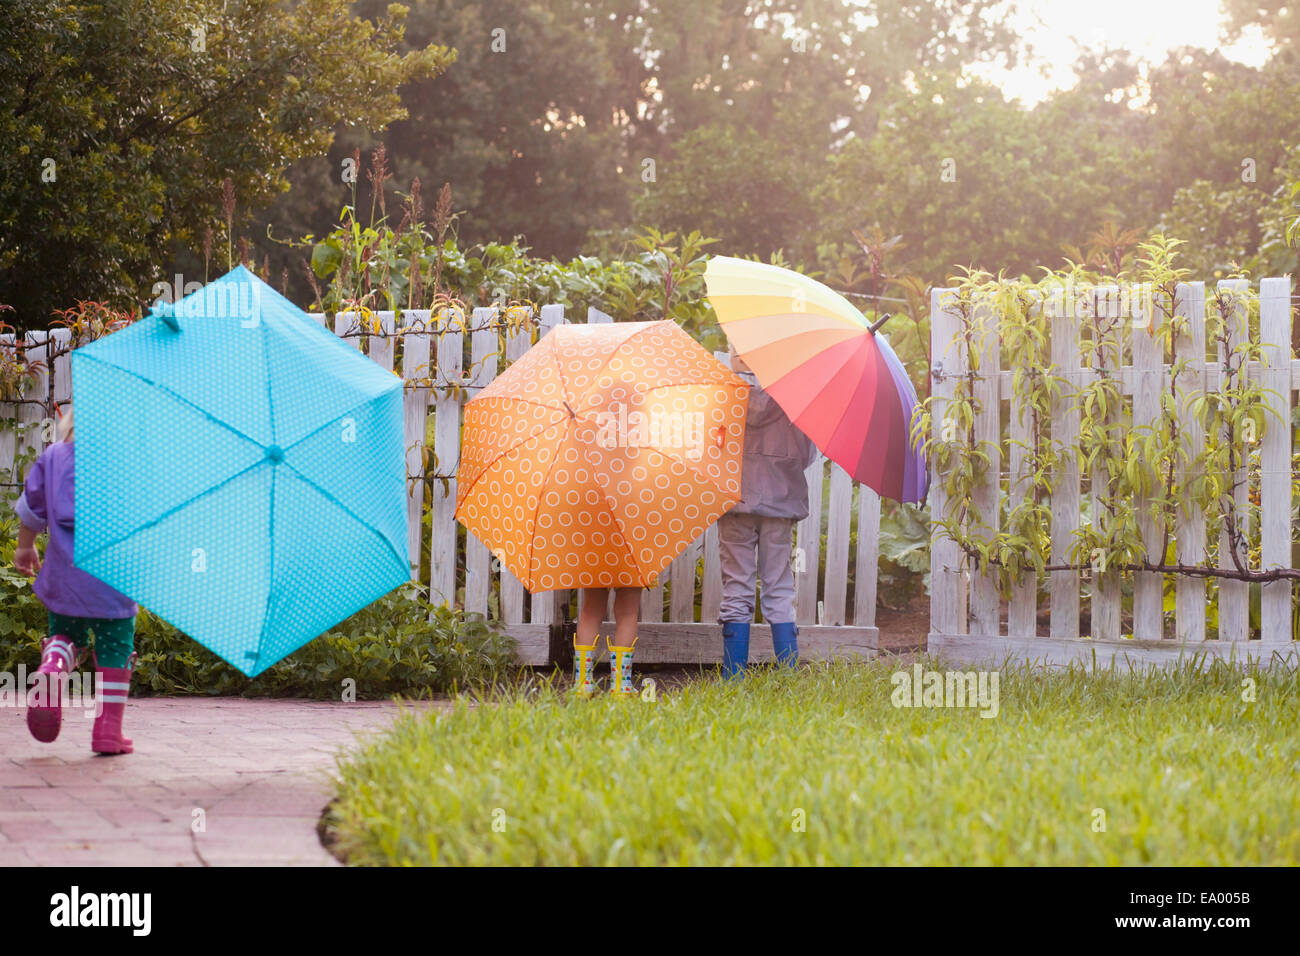 Boy and two sisters playing in garden carrying umbrellas Stock Photo